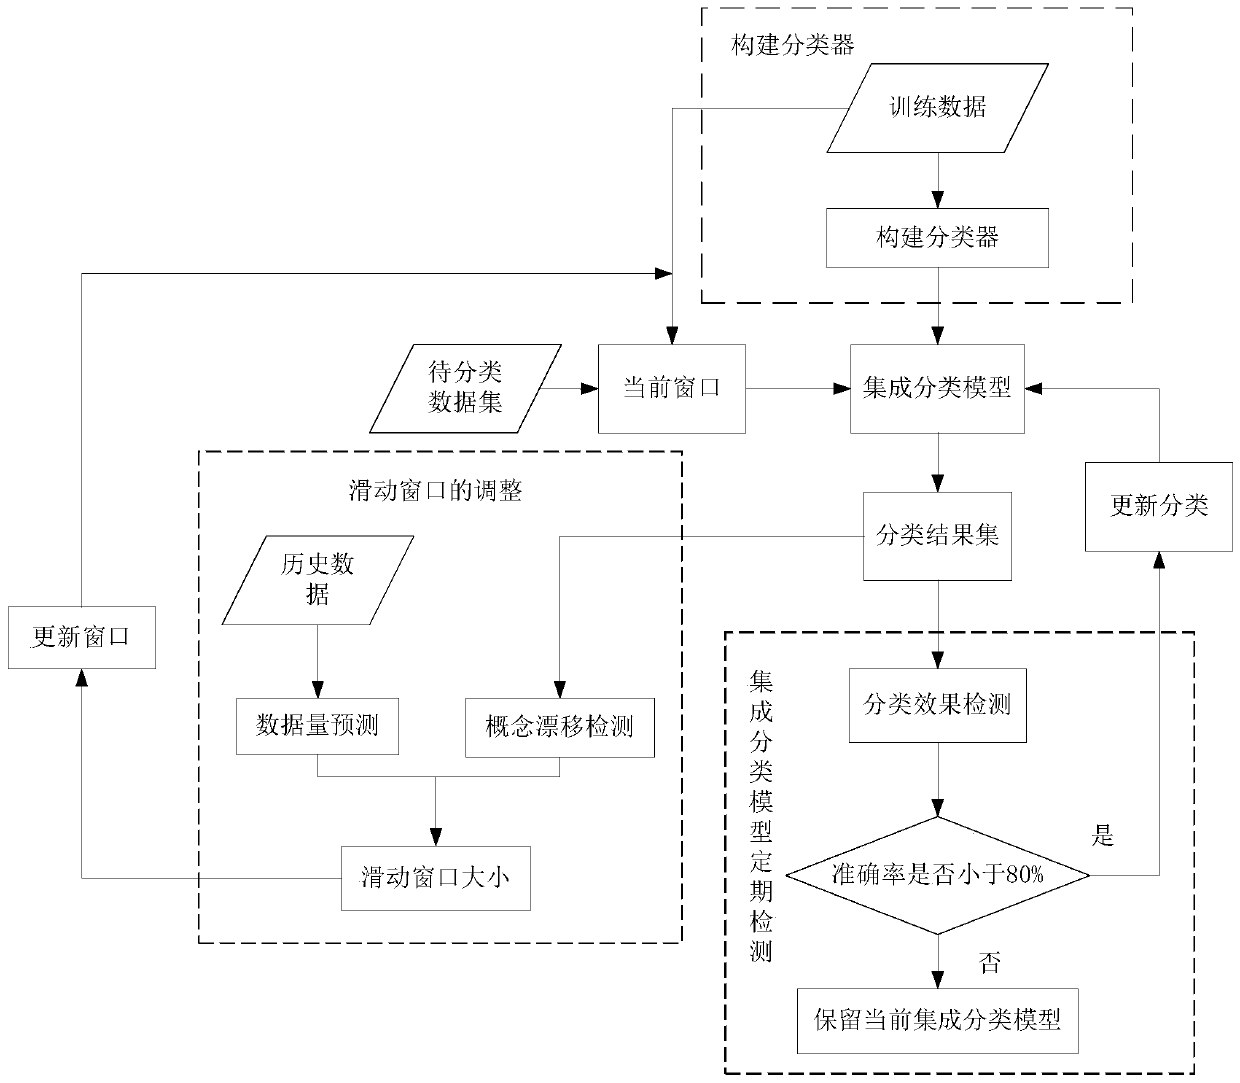 Streaming data classification method based on decision tree